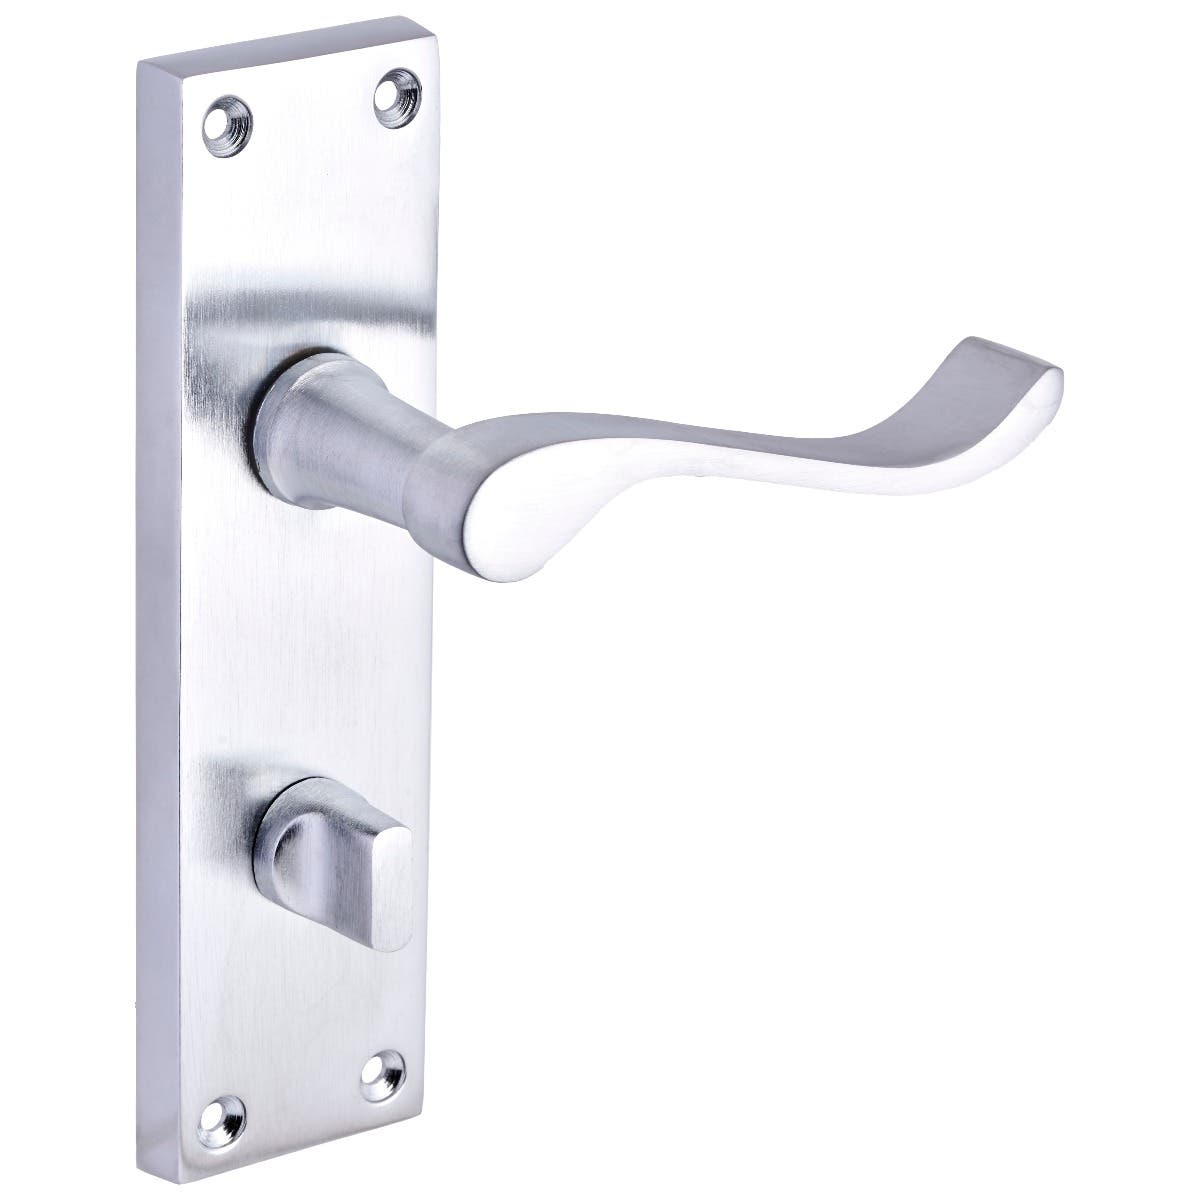 MITRED BATH/WC Door Handle BACK PLATE 179mm Satin Chrome Duo FINISH D30 